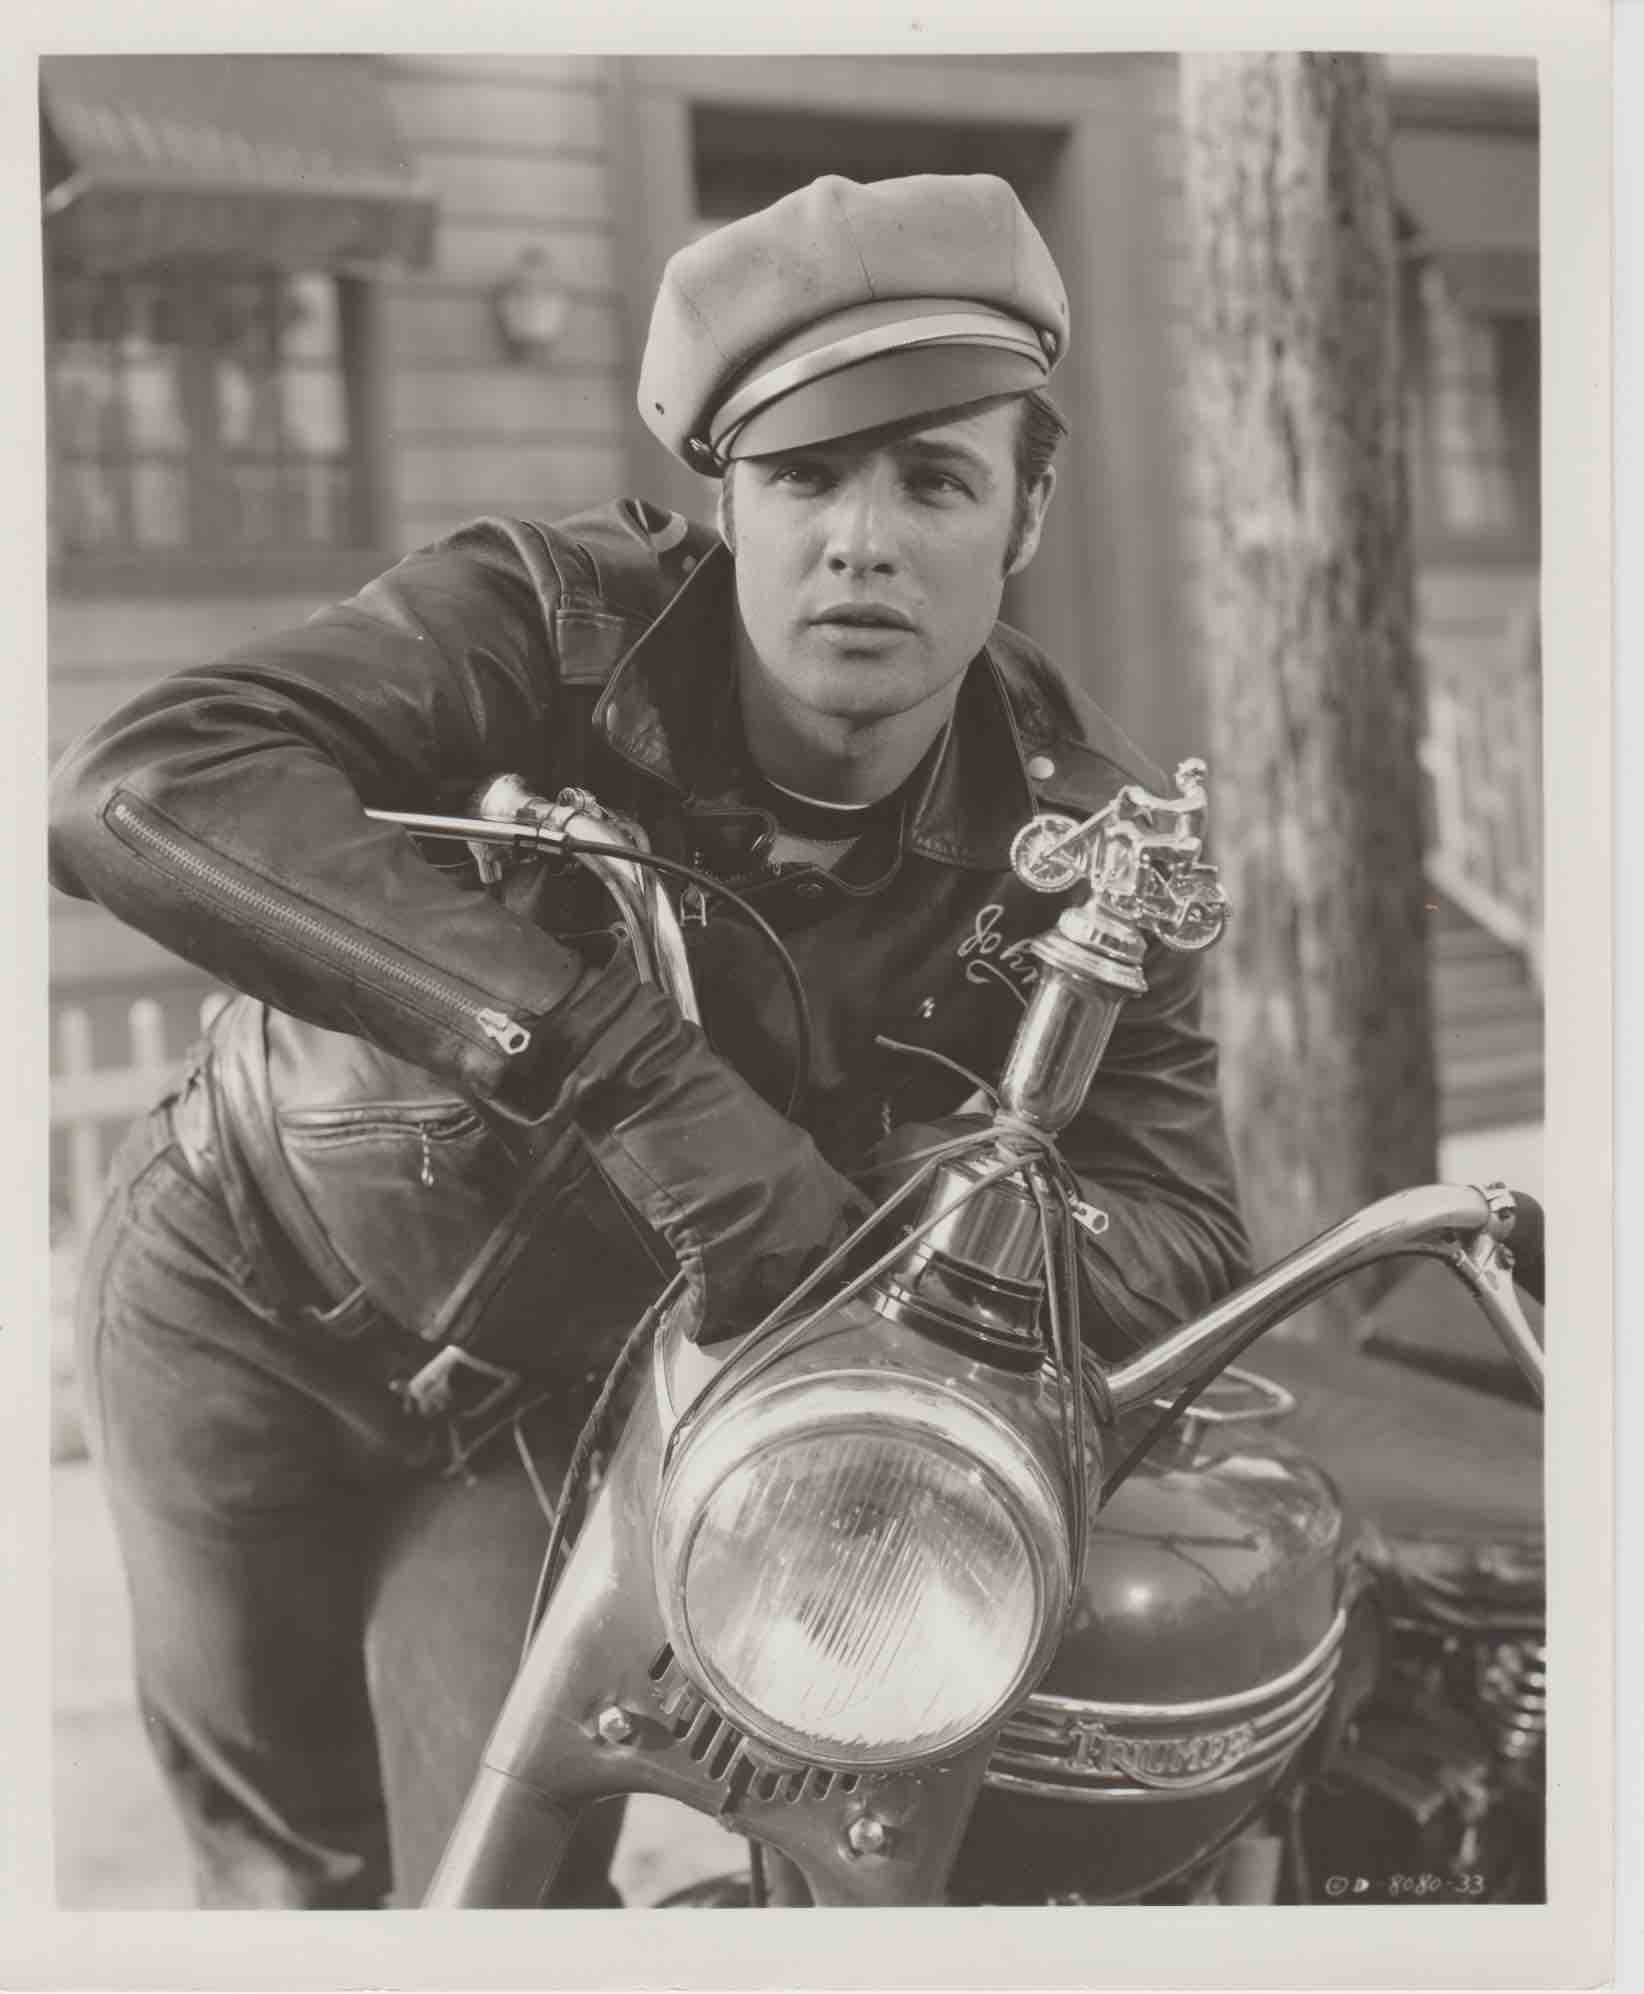 The Wild One Original Photograph - Blue Robin Collectables